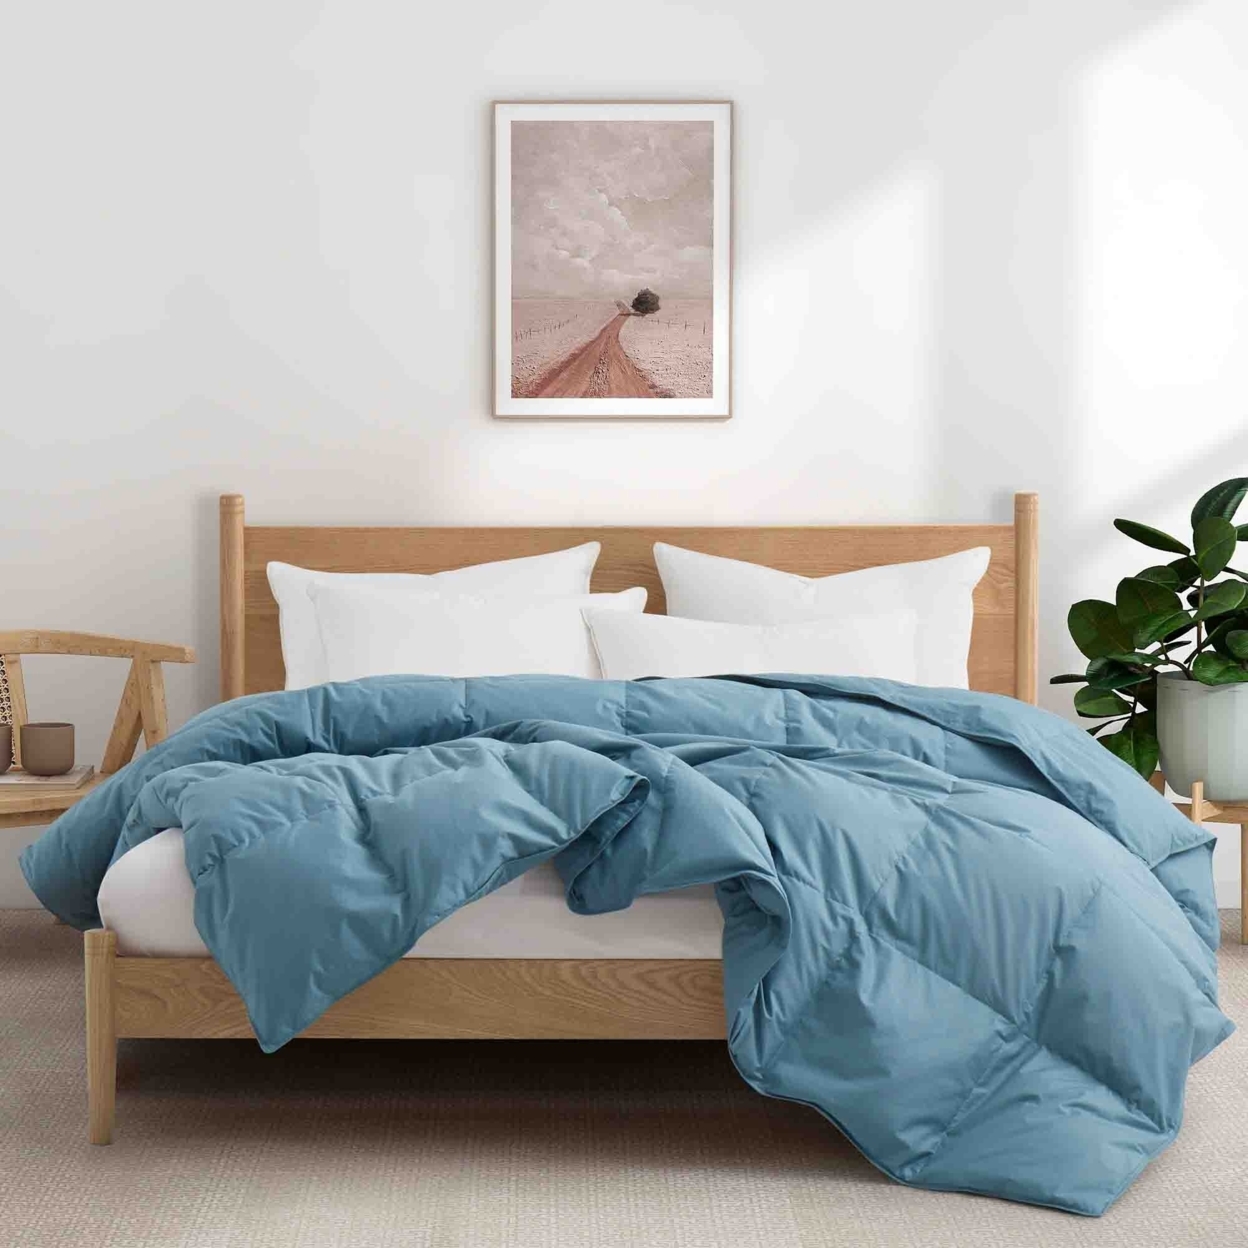 All Season Organic Cotton Comforter Filled With Down And Feather Fiber - Steel Blue, Twin